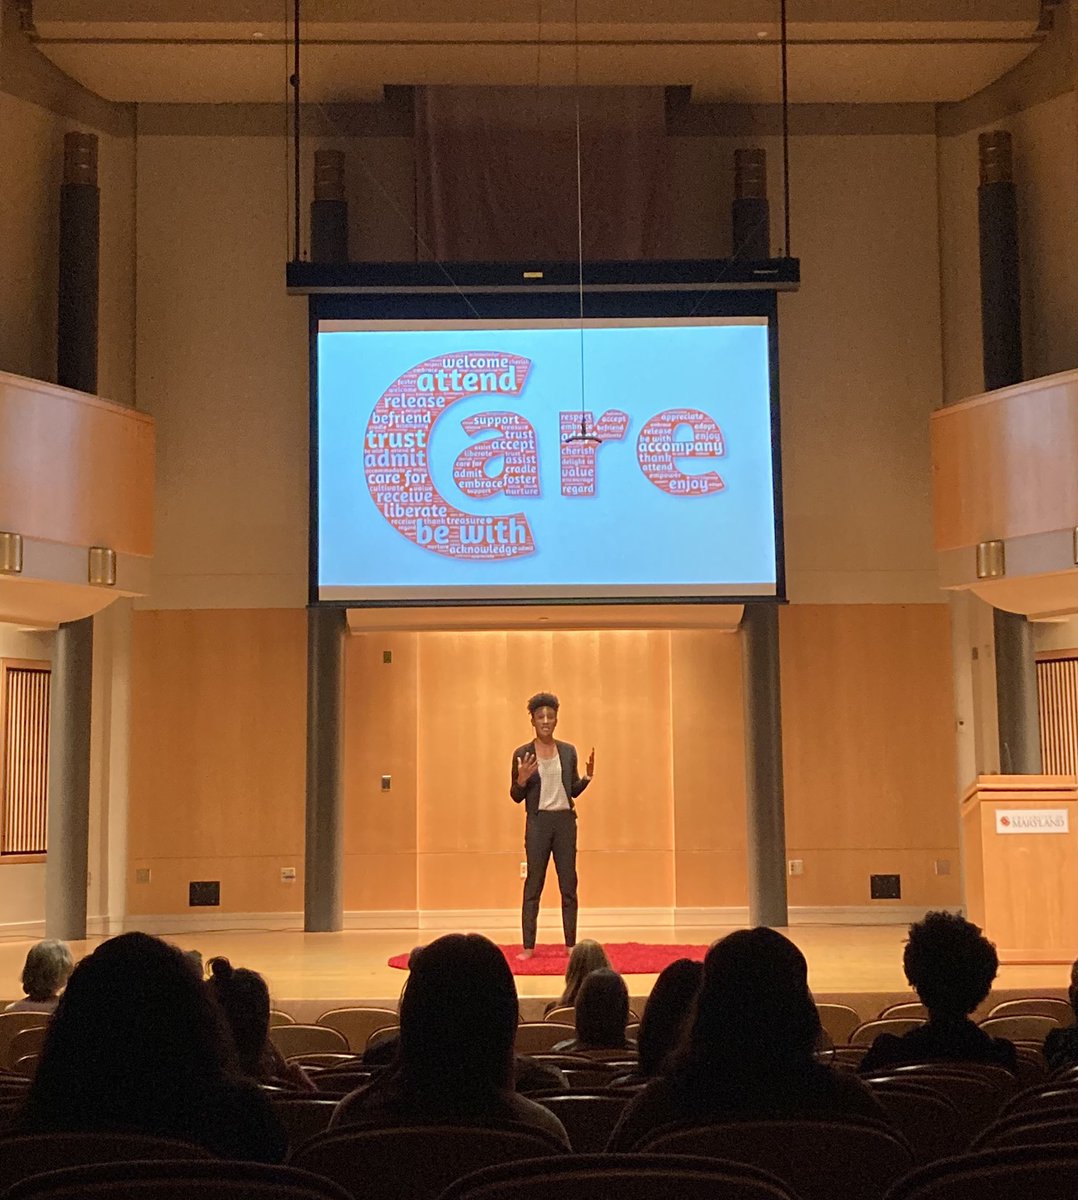 “My research suggests that care is at the center of good mentoring relationships, and a key part of what makes them so effective” - Dr. Kimberly A. Griffin @doctorkag #TerrapinEdTalks #EdTerps #UMD #GoTerps #Event